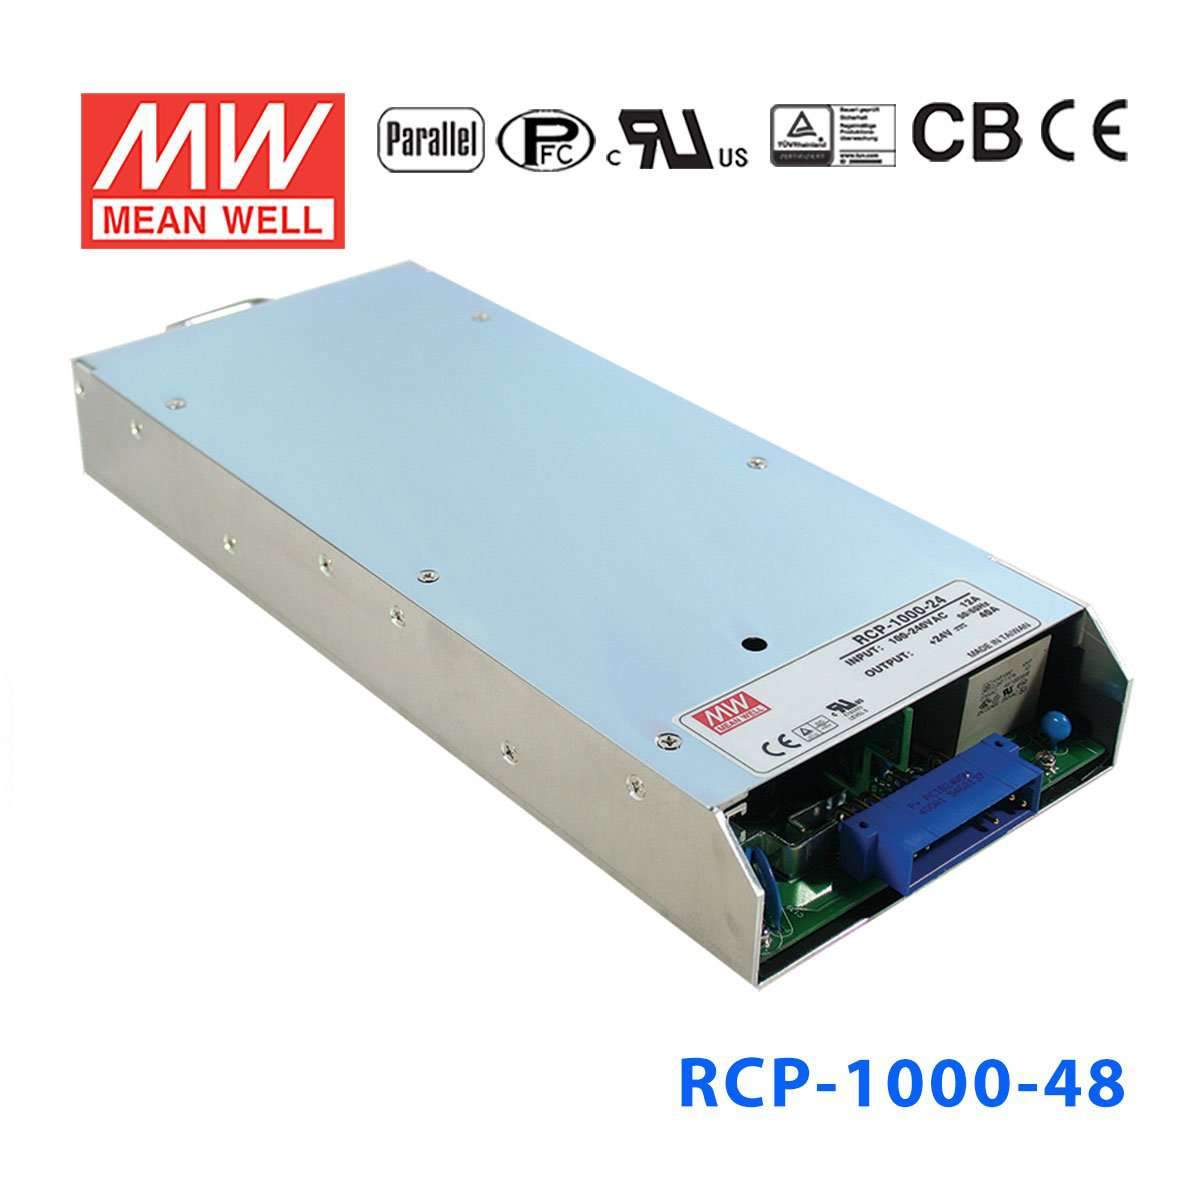 Mean Well RCP-1000-48 power supply 1000W 48V 21A